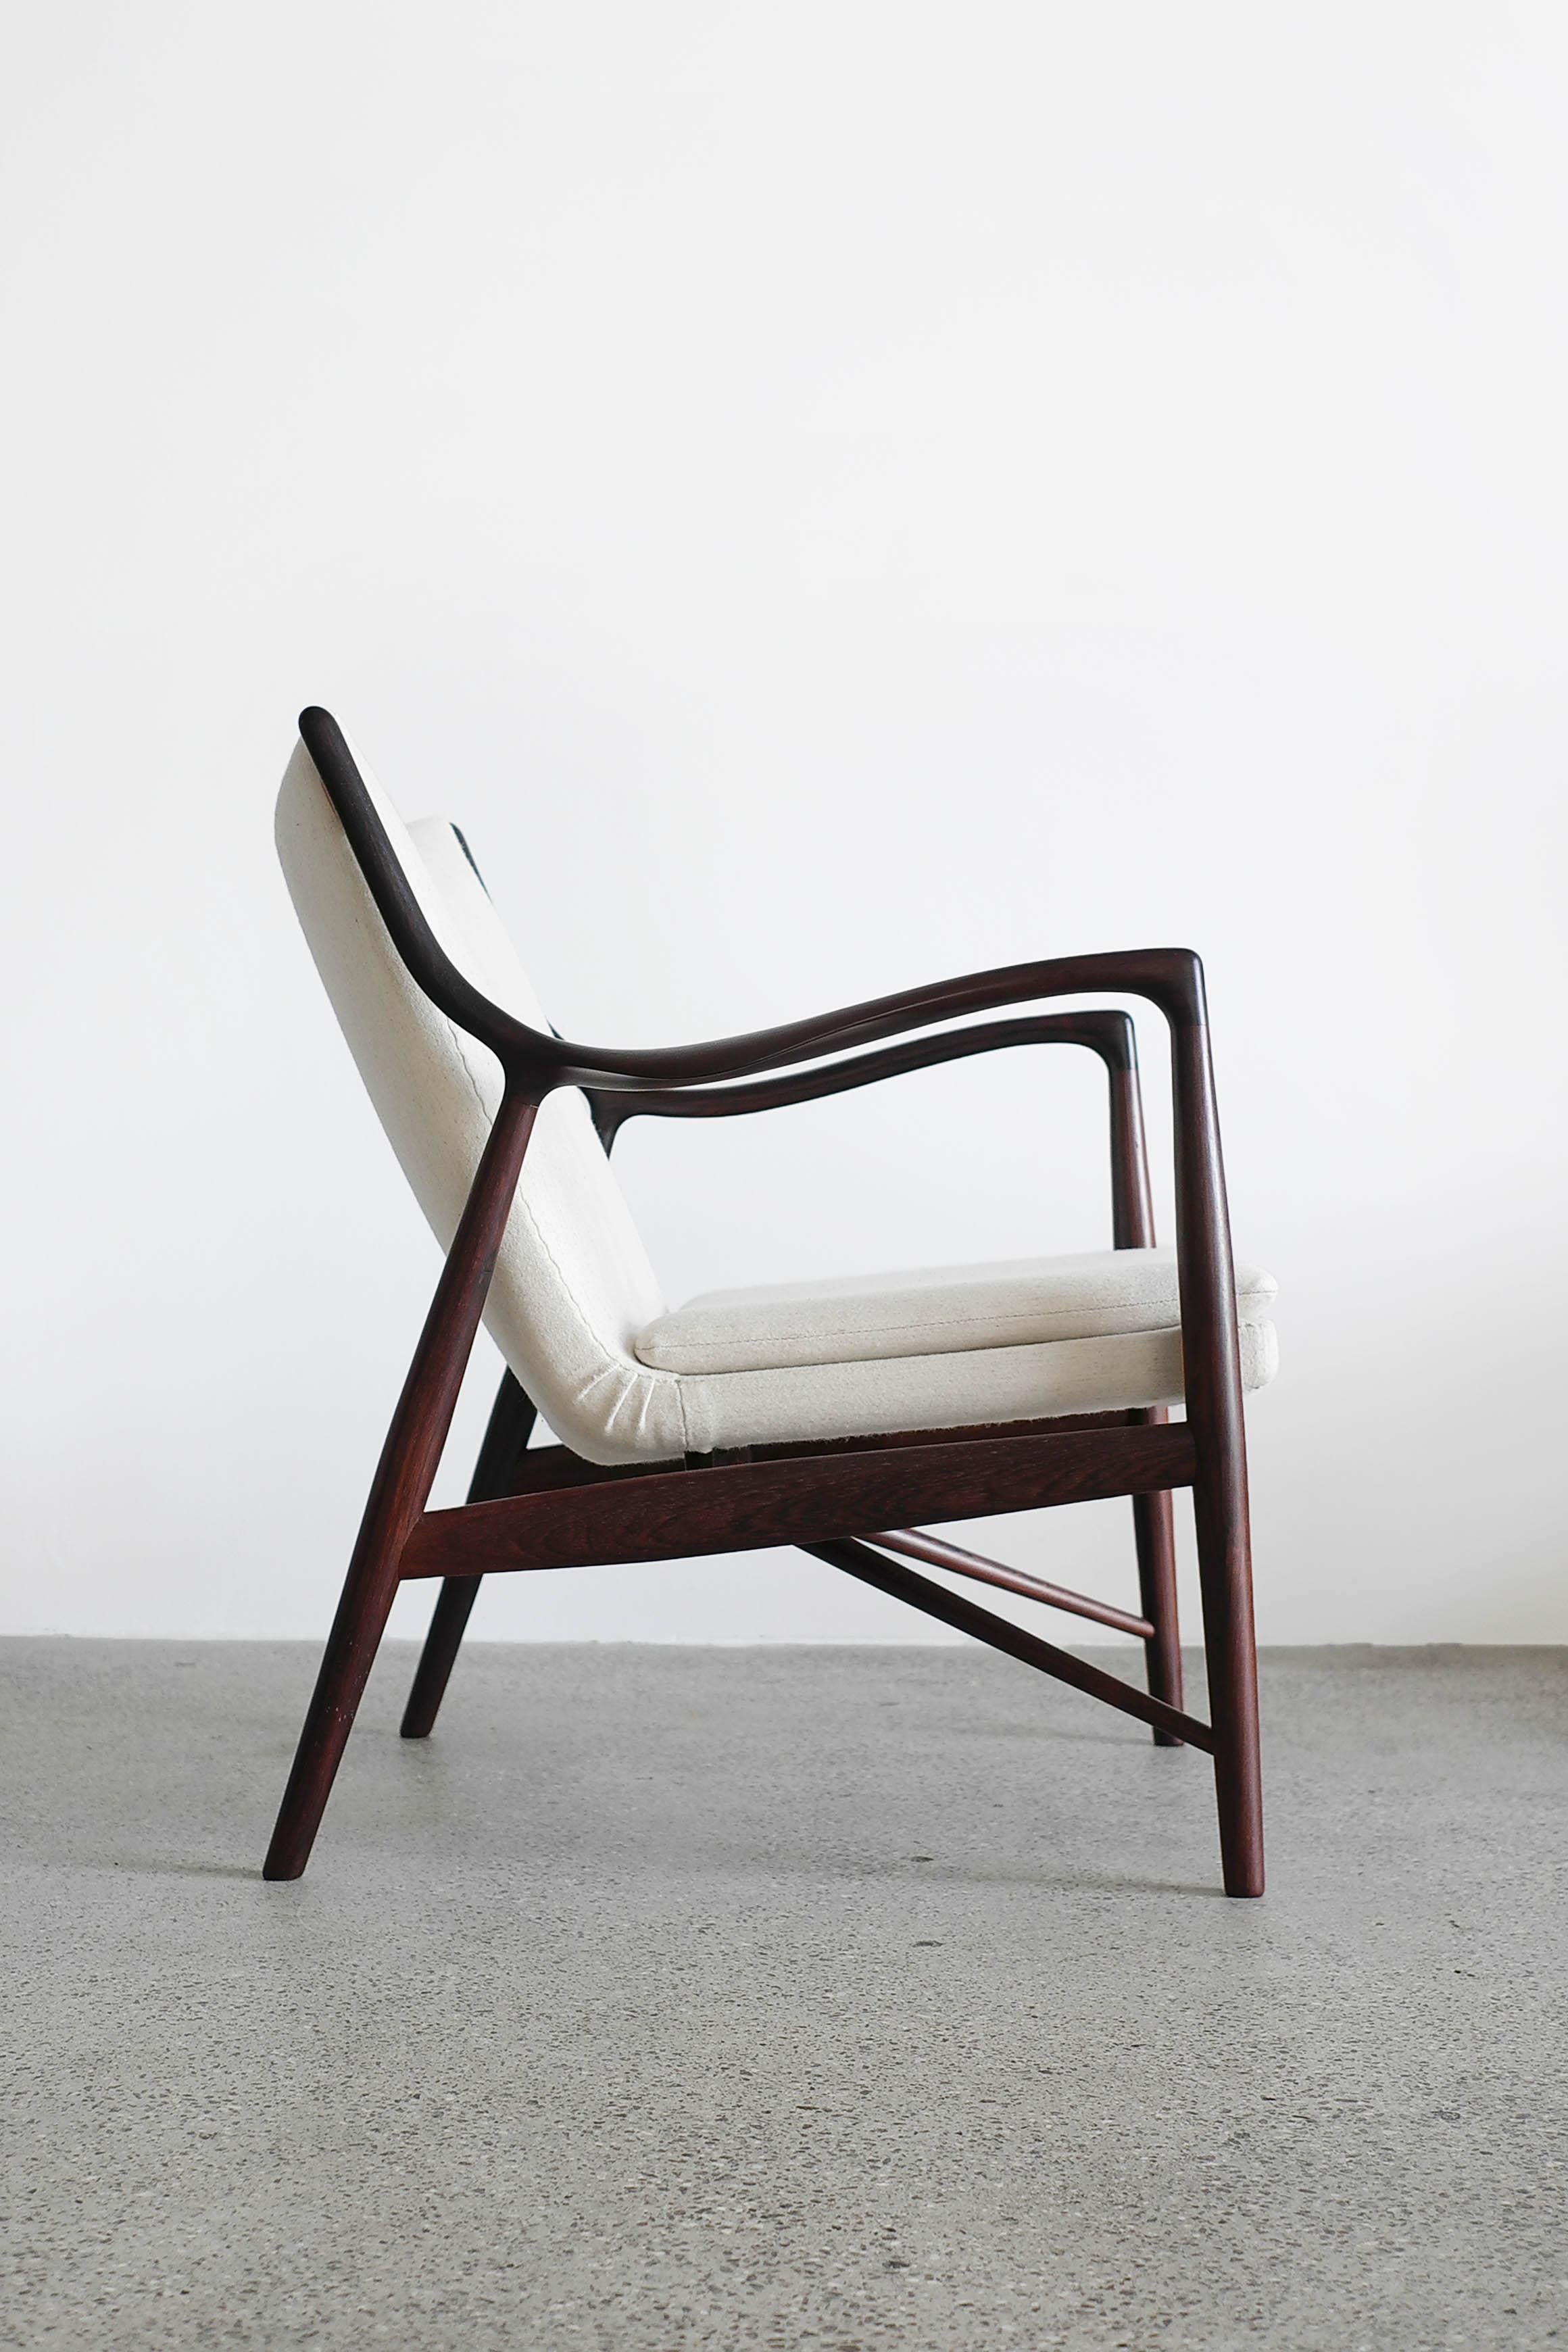 Finn Juhl NV 45 chair with frame of Brazilian rosewood, upholstered with fabric.

Designed 1945 and made at cabinetmaker Niels Vodder. Stamped by maker. 

A pair of 45 chairs in rosewood available.